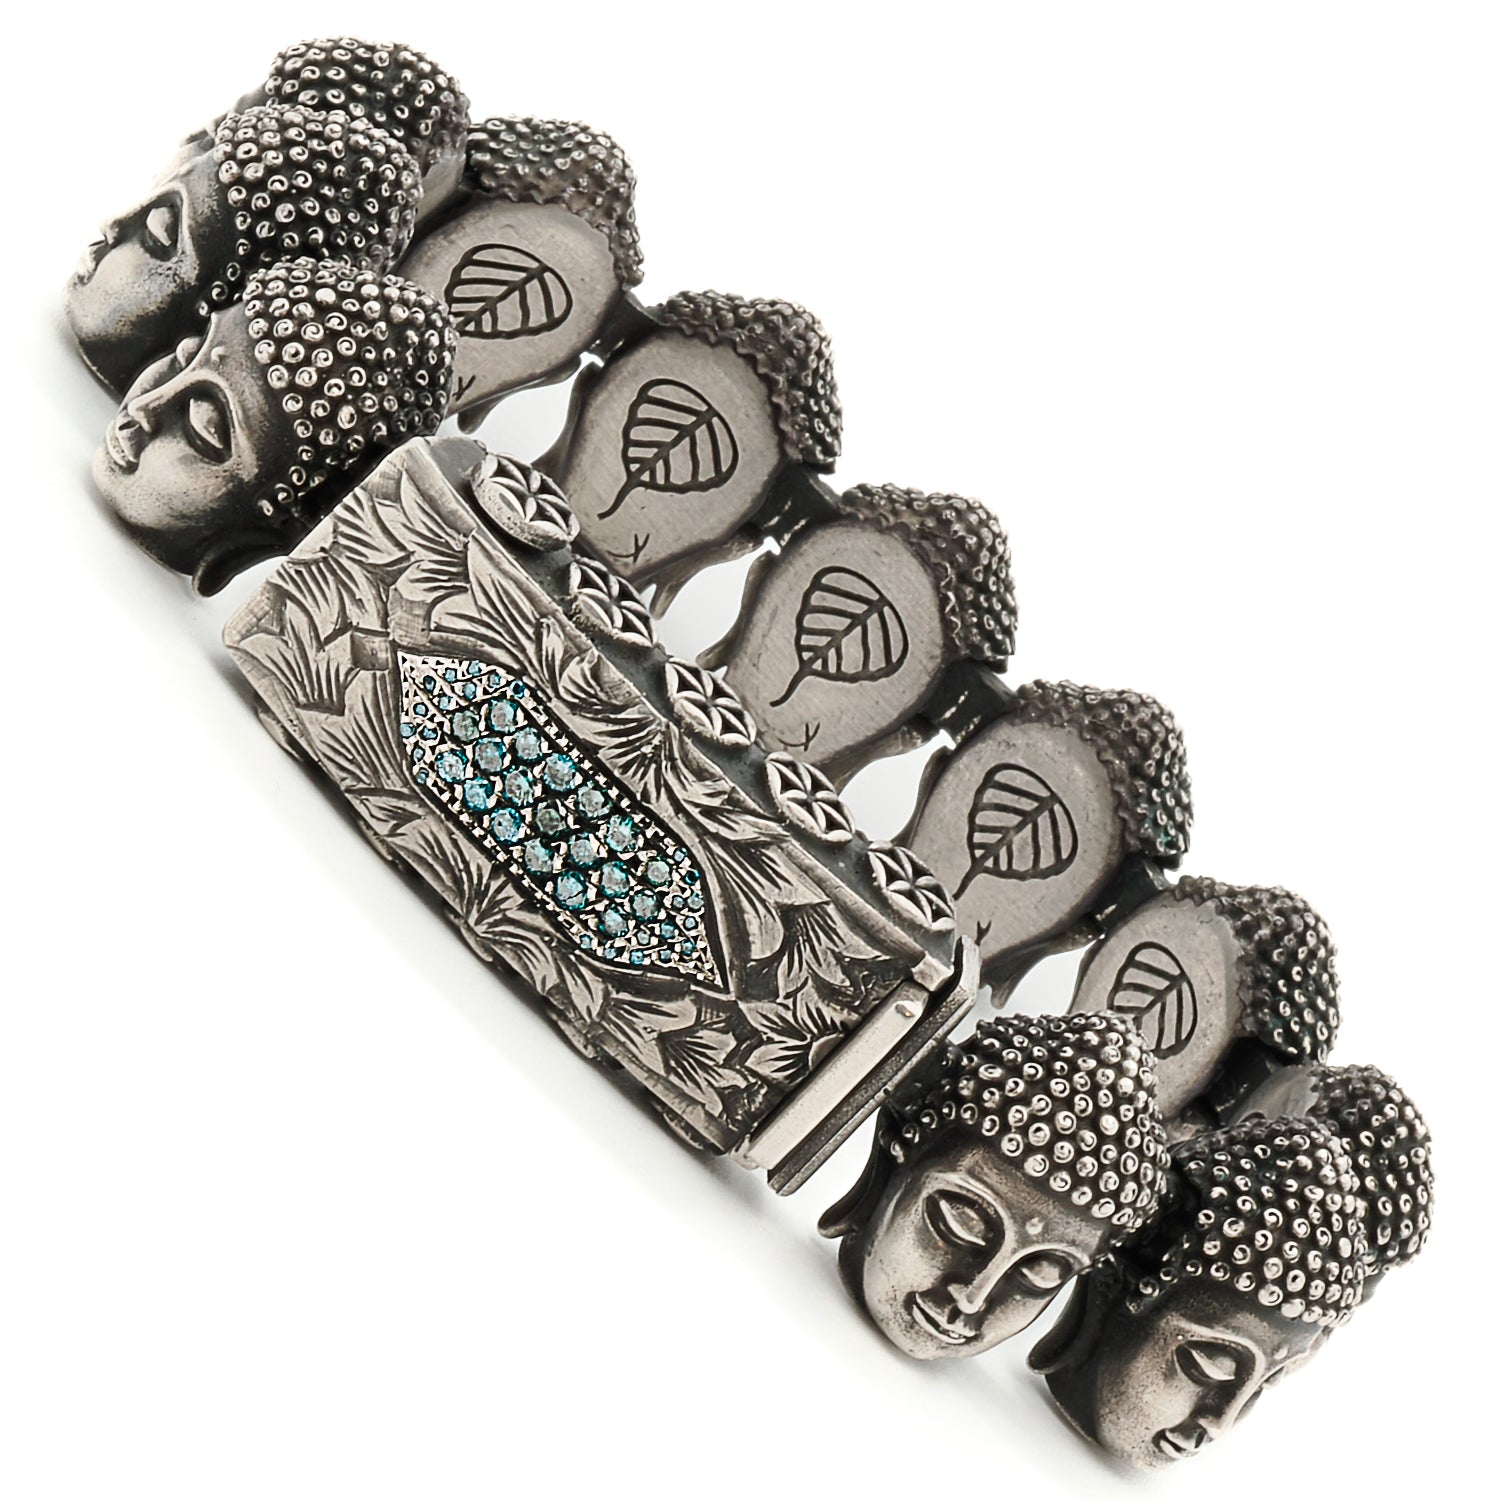 Recycled Materials - Silver and Diamond Buddha Peace Bracelet, an eco-friendly choice.